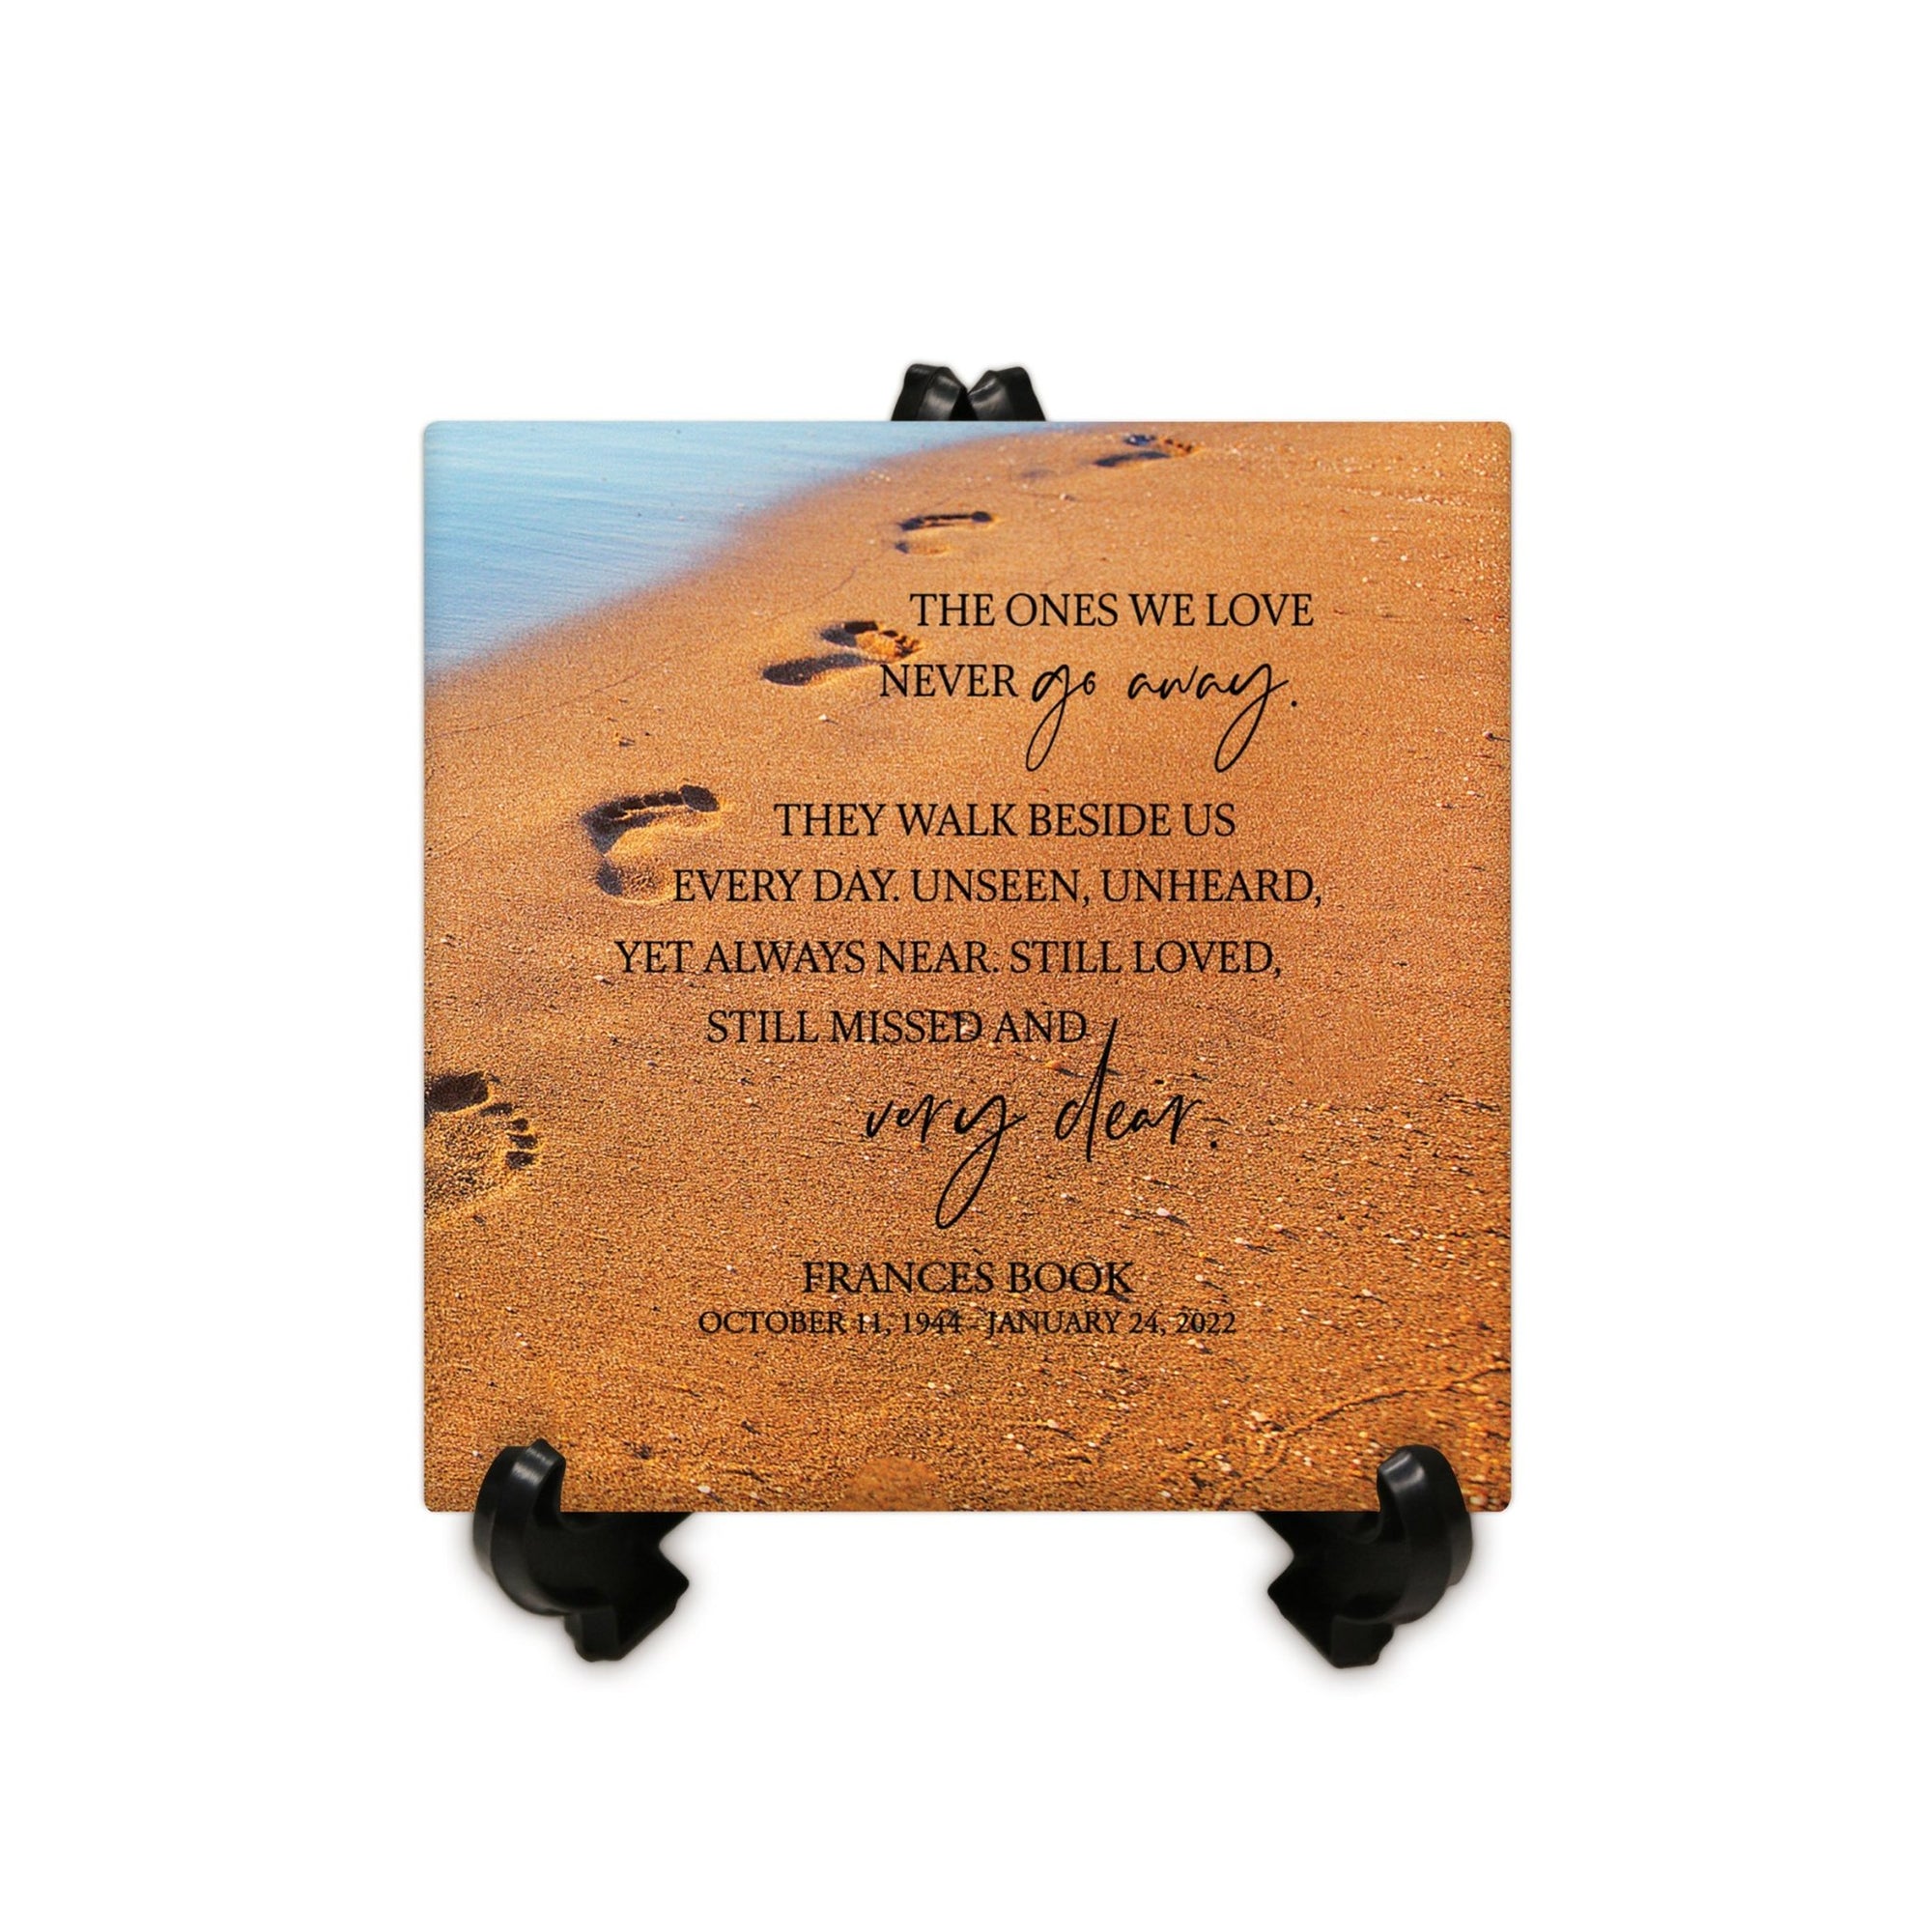 Personalized Memorial Ceramic Trivet with Stand for Home Decor - The Ones We Love - LifeSong Milestones